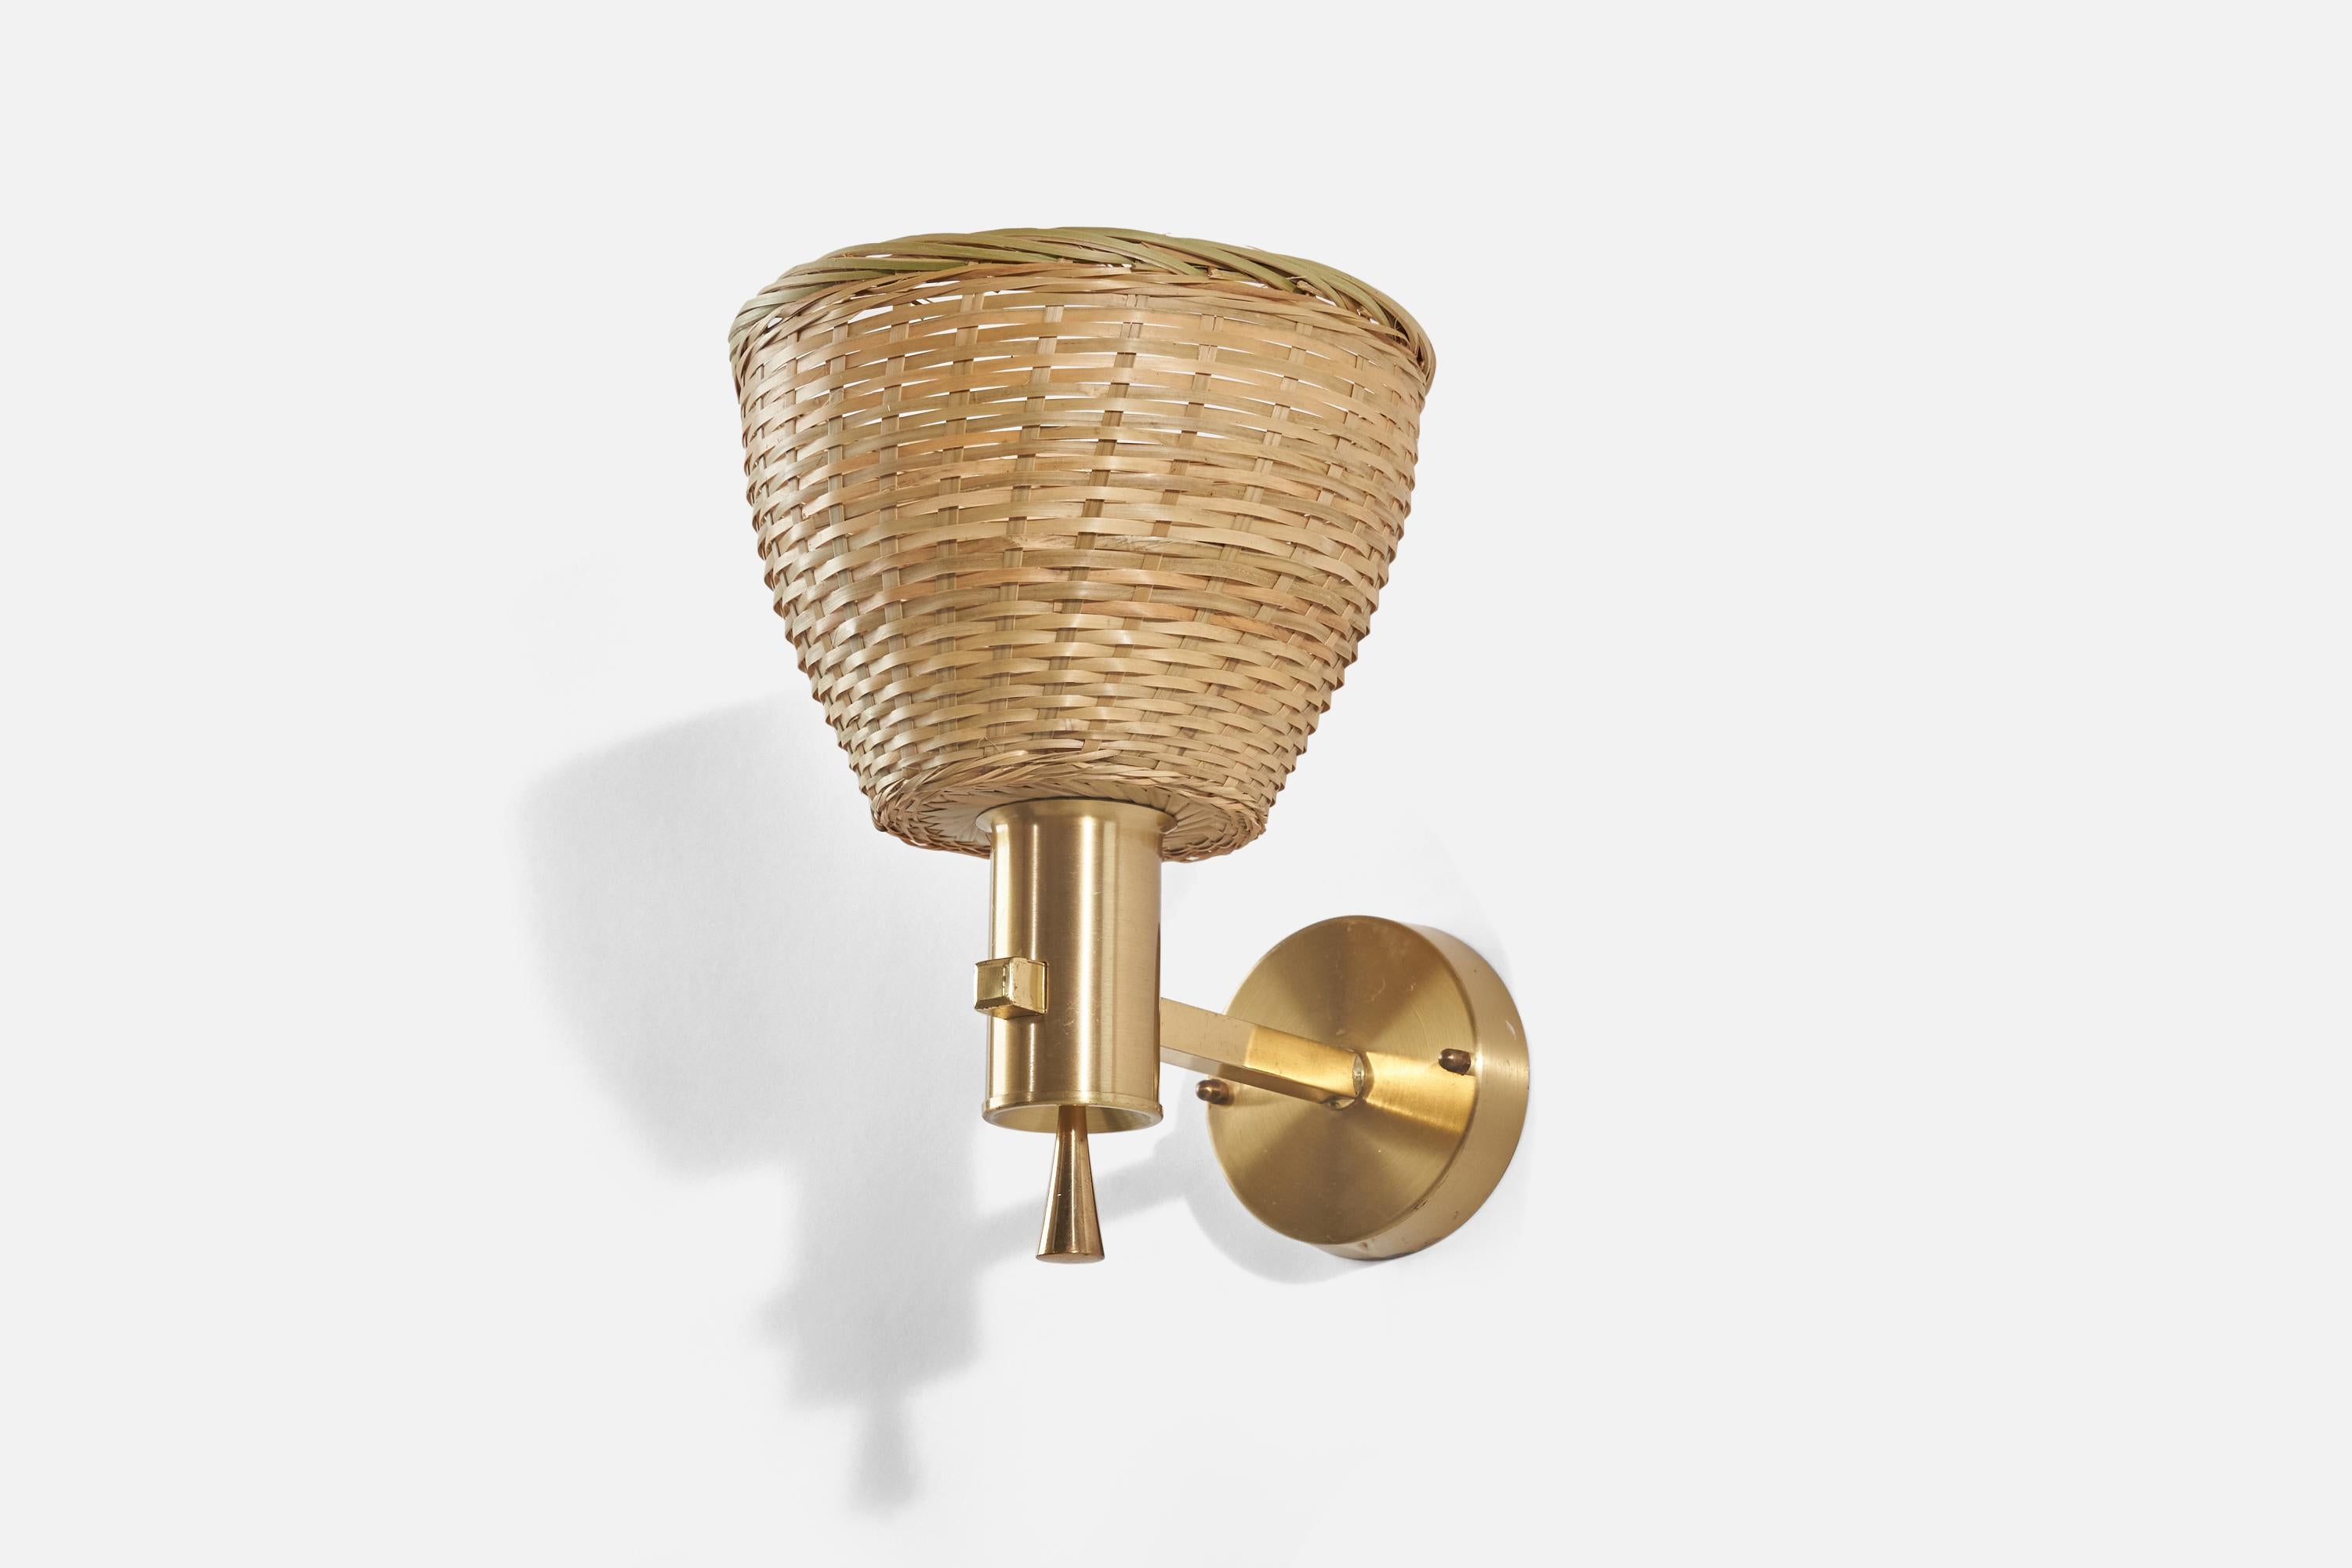 A brass and rattan wall light designed and produced by Eric Wärnå, Sweden, c. 1960s. 

Sold with lampshade(s). Dimensions stated are of Sconce with Shade(s).

Dimensions of back plate (inches) : 3.54 x 3.54 x 0.90 (height x width x